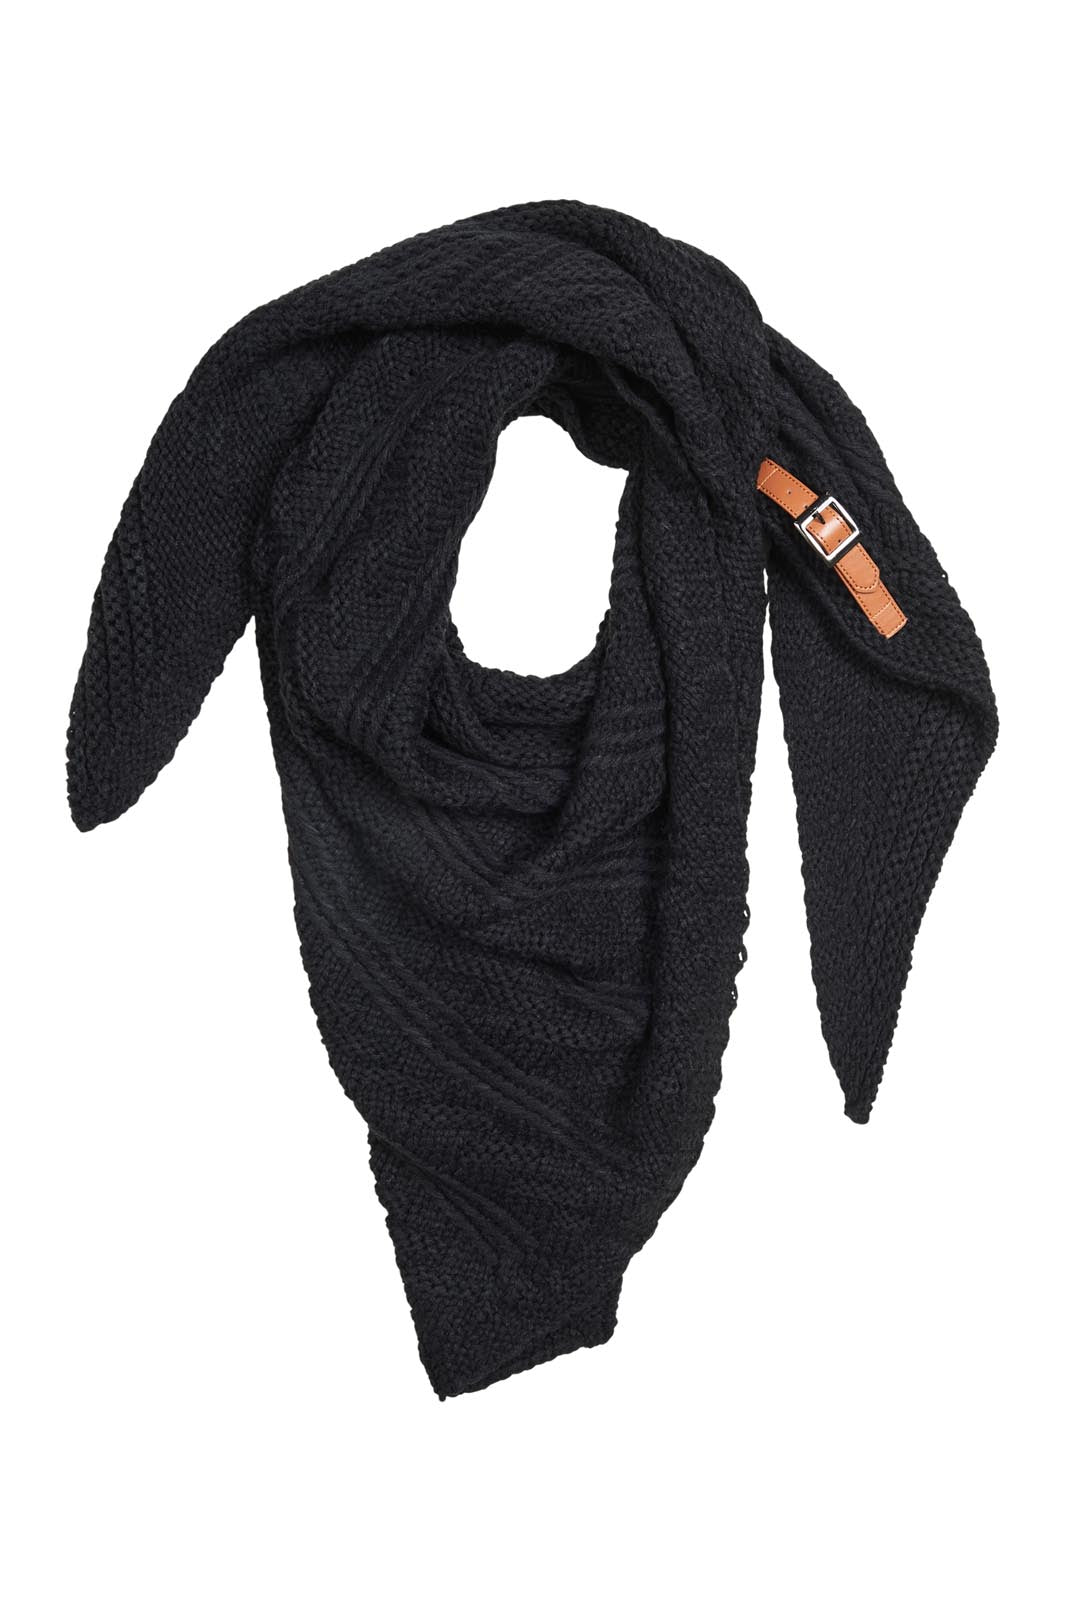 Sepia Cable Scarf - Ebony - eb&ive Scarves